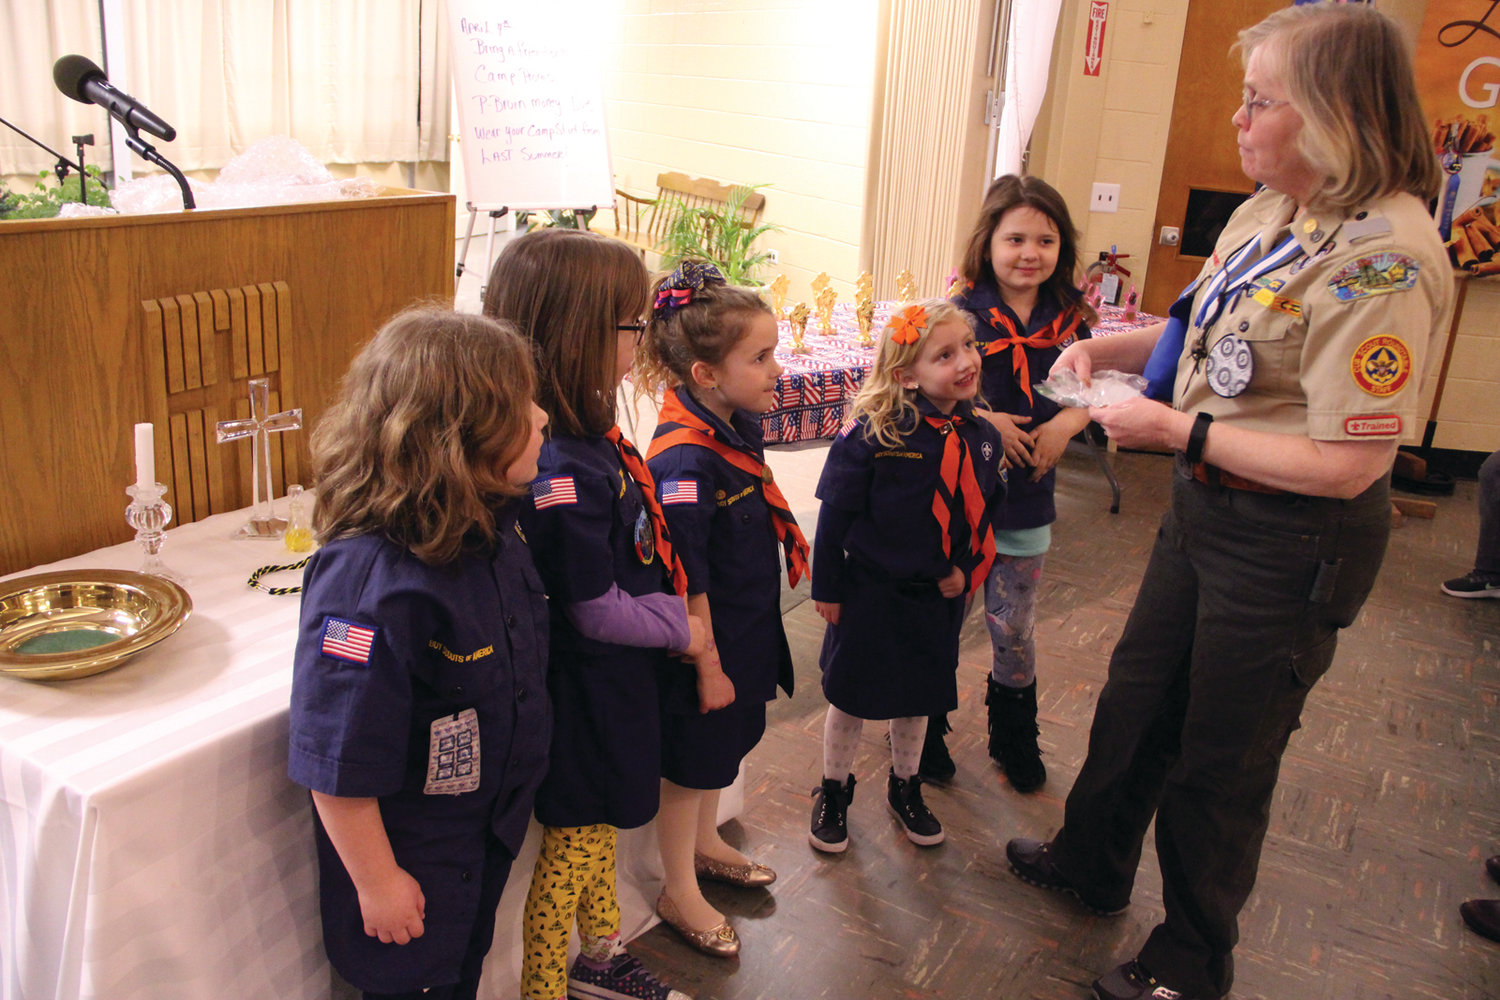 Den Leader Patty Gomm awards badges to members of her Cub Scouts pack.